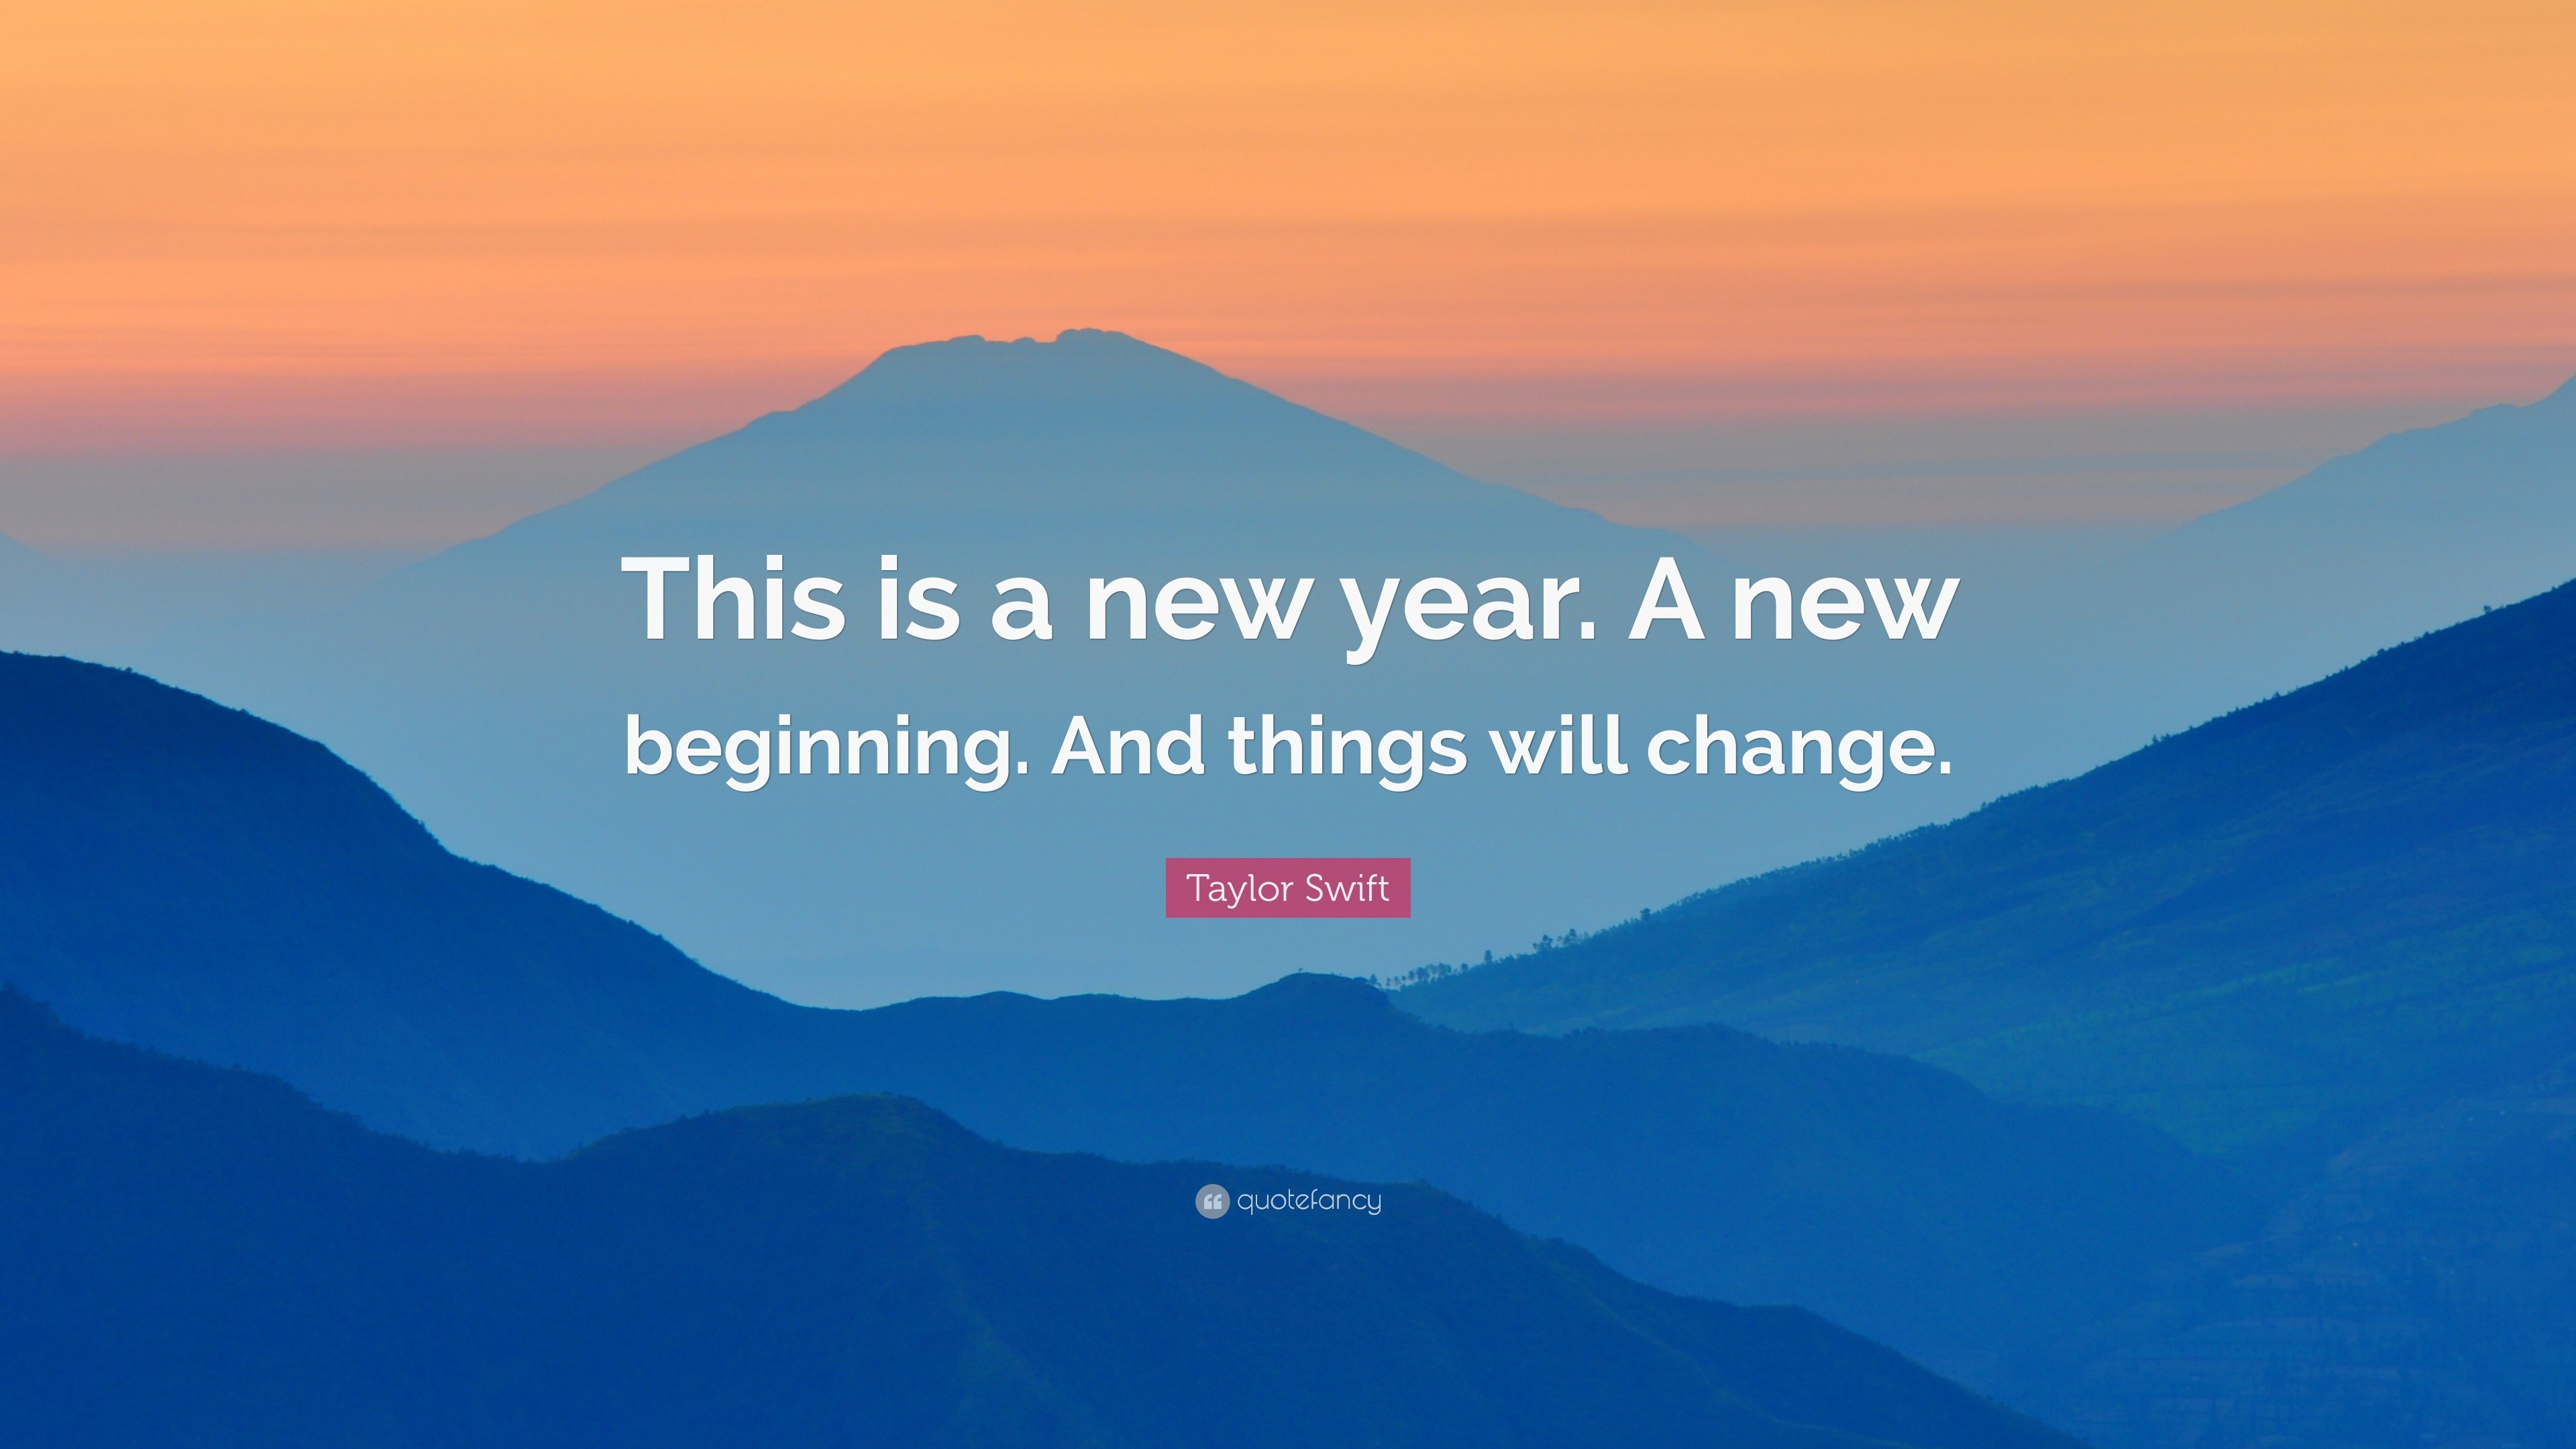 Taylor Swift Quote “This is a new year. A new beginning. And things